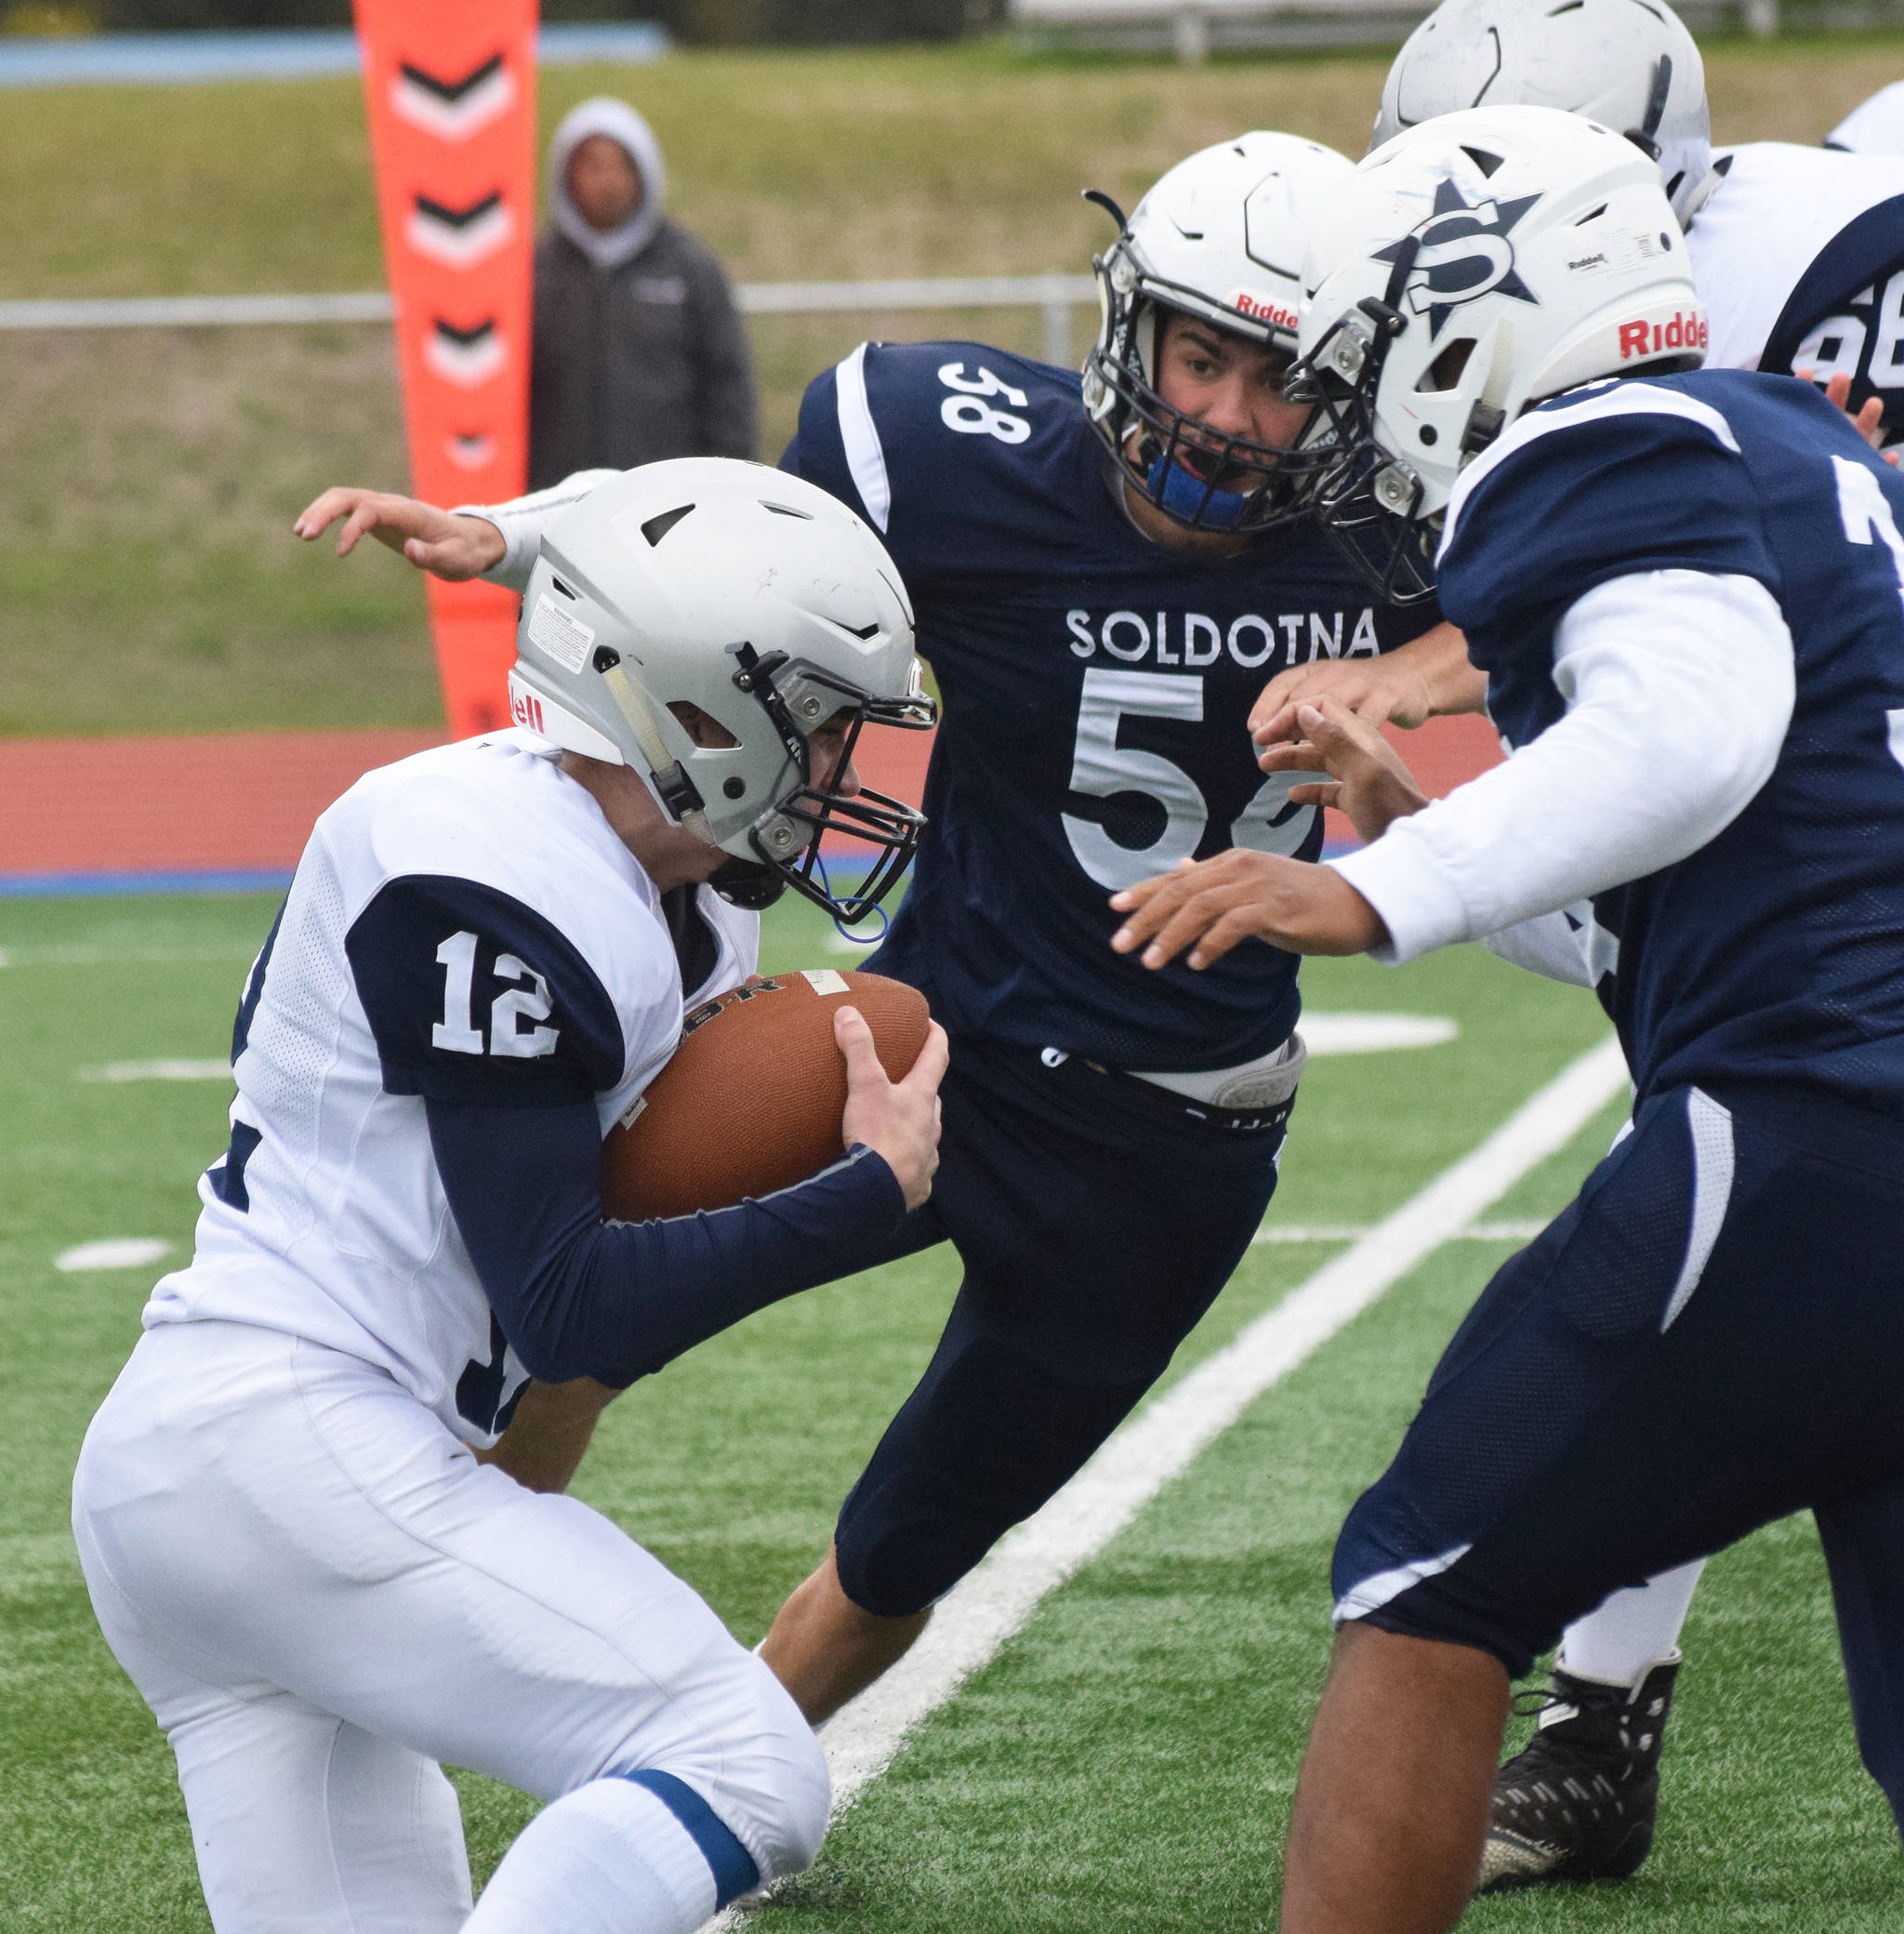 Soldotna’s Zack Ziegler rushes Eagle River quarterback Nathaniel Guderian, Saturday, Sept. 28, 2019, against Eagle River at Justin Maile Field in Soldotna. (Photo by Joey Klecka/Peninsula Clarion)